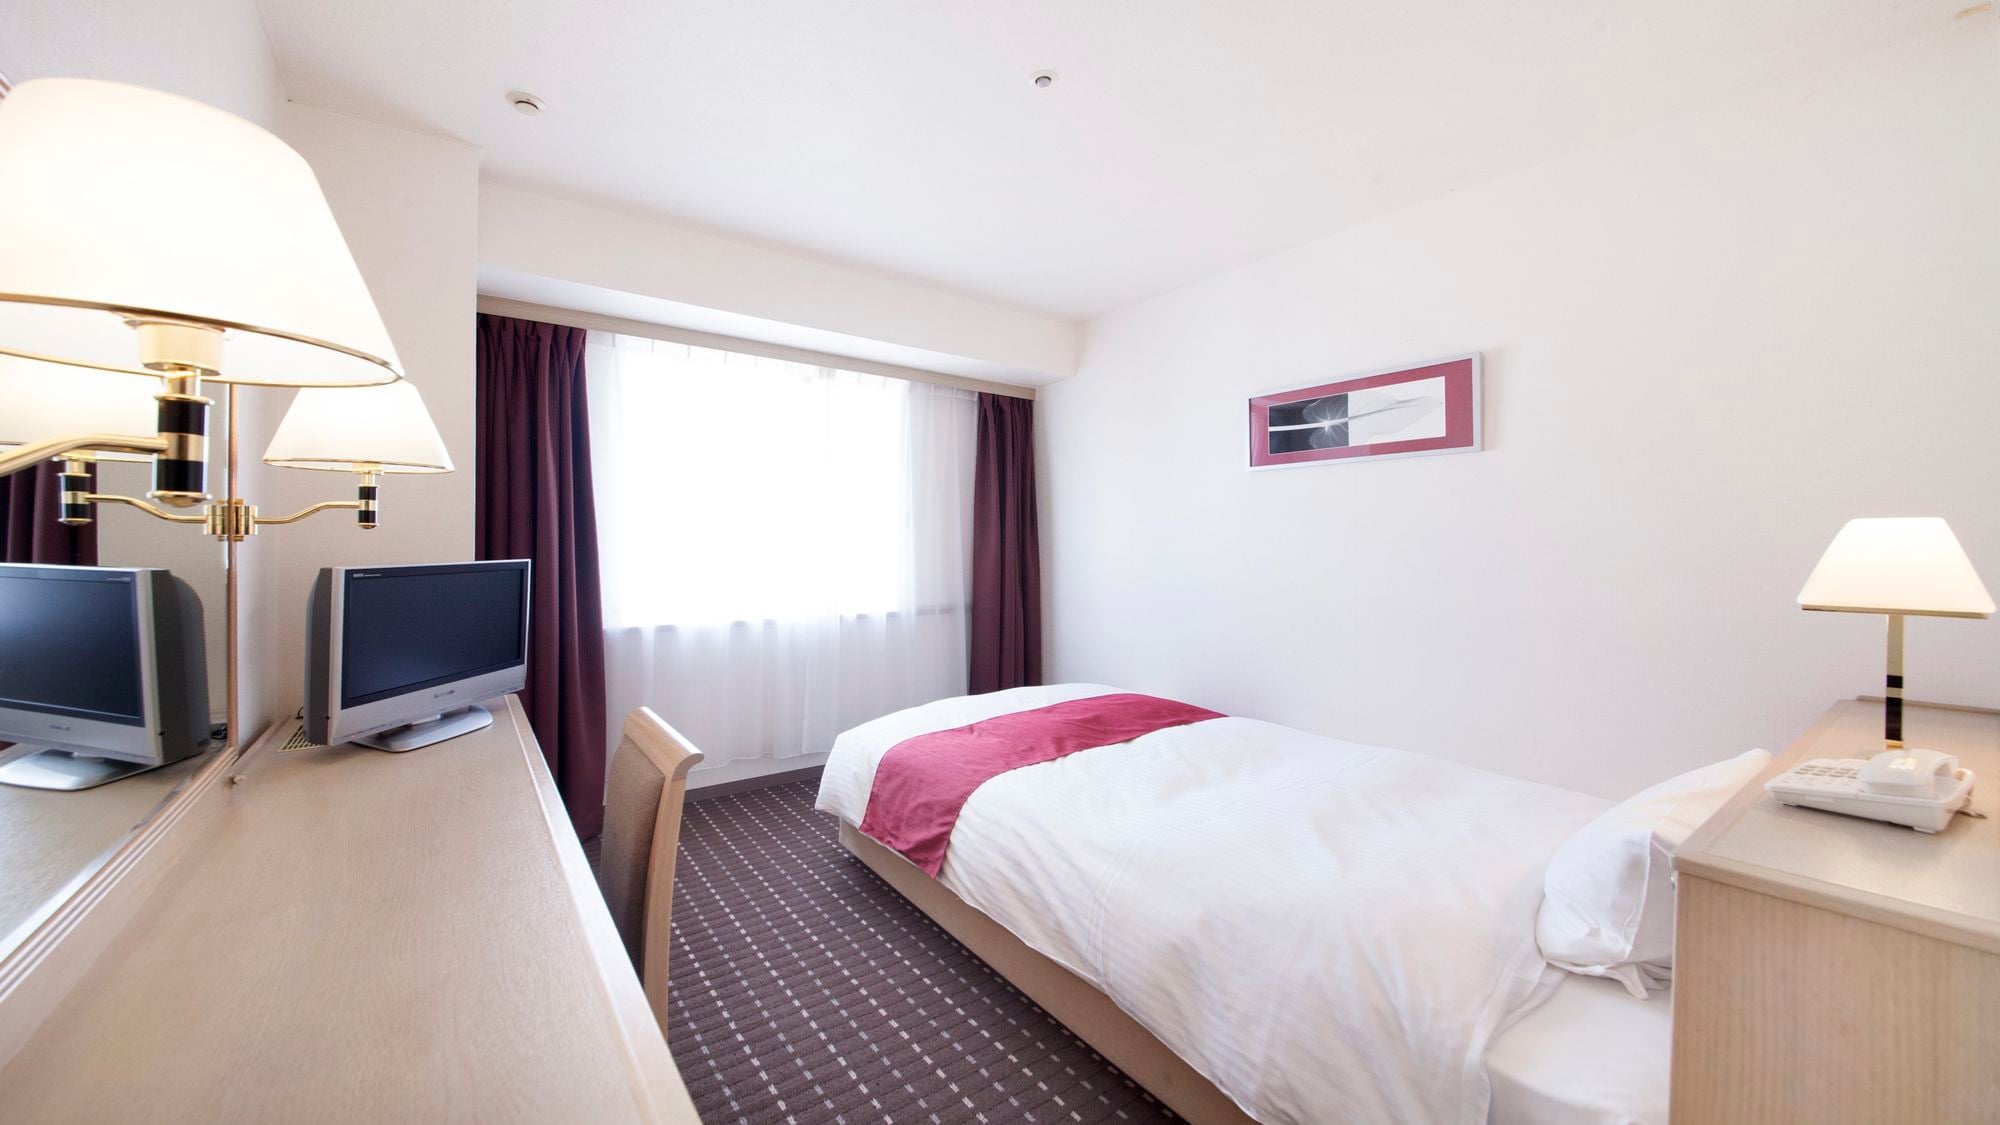 [Standard Semi-Double] You can spend your time comfortably in a room equipped with high-quality amenities.